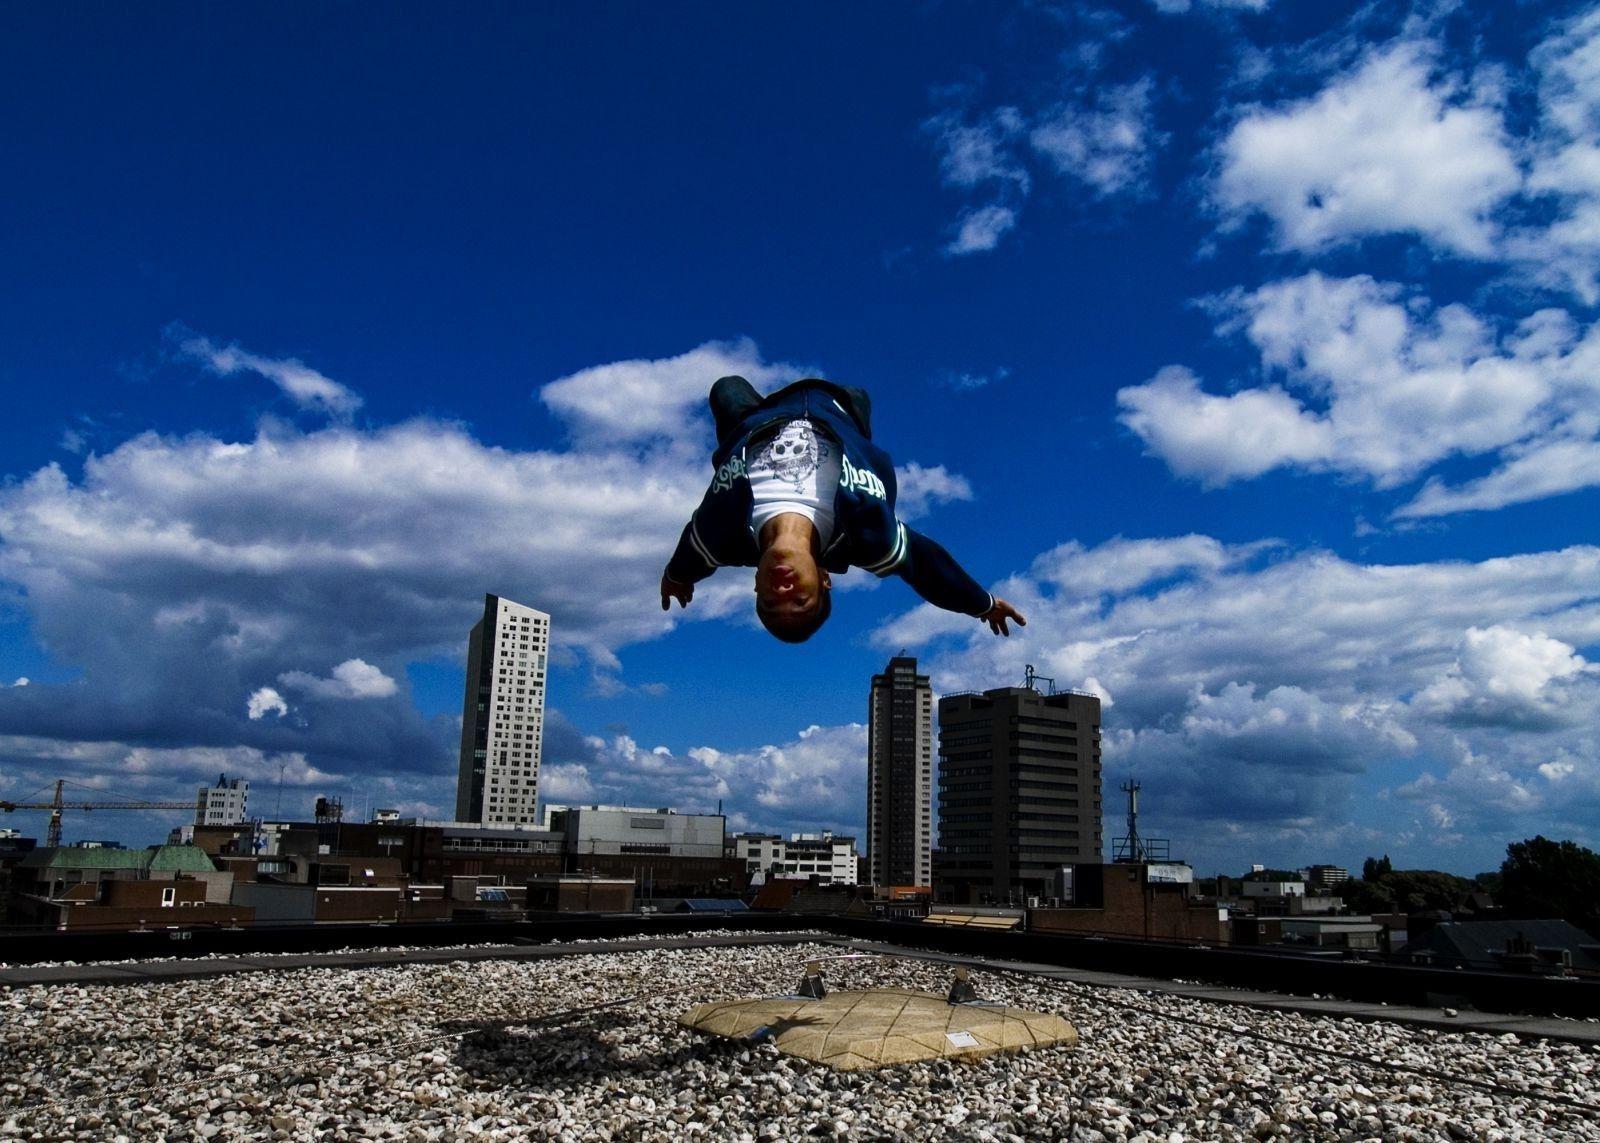 The guy doing parkour performs a backflip on the roof